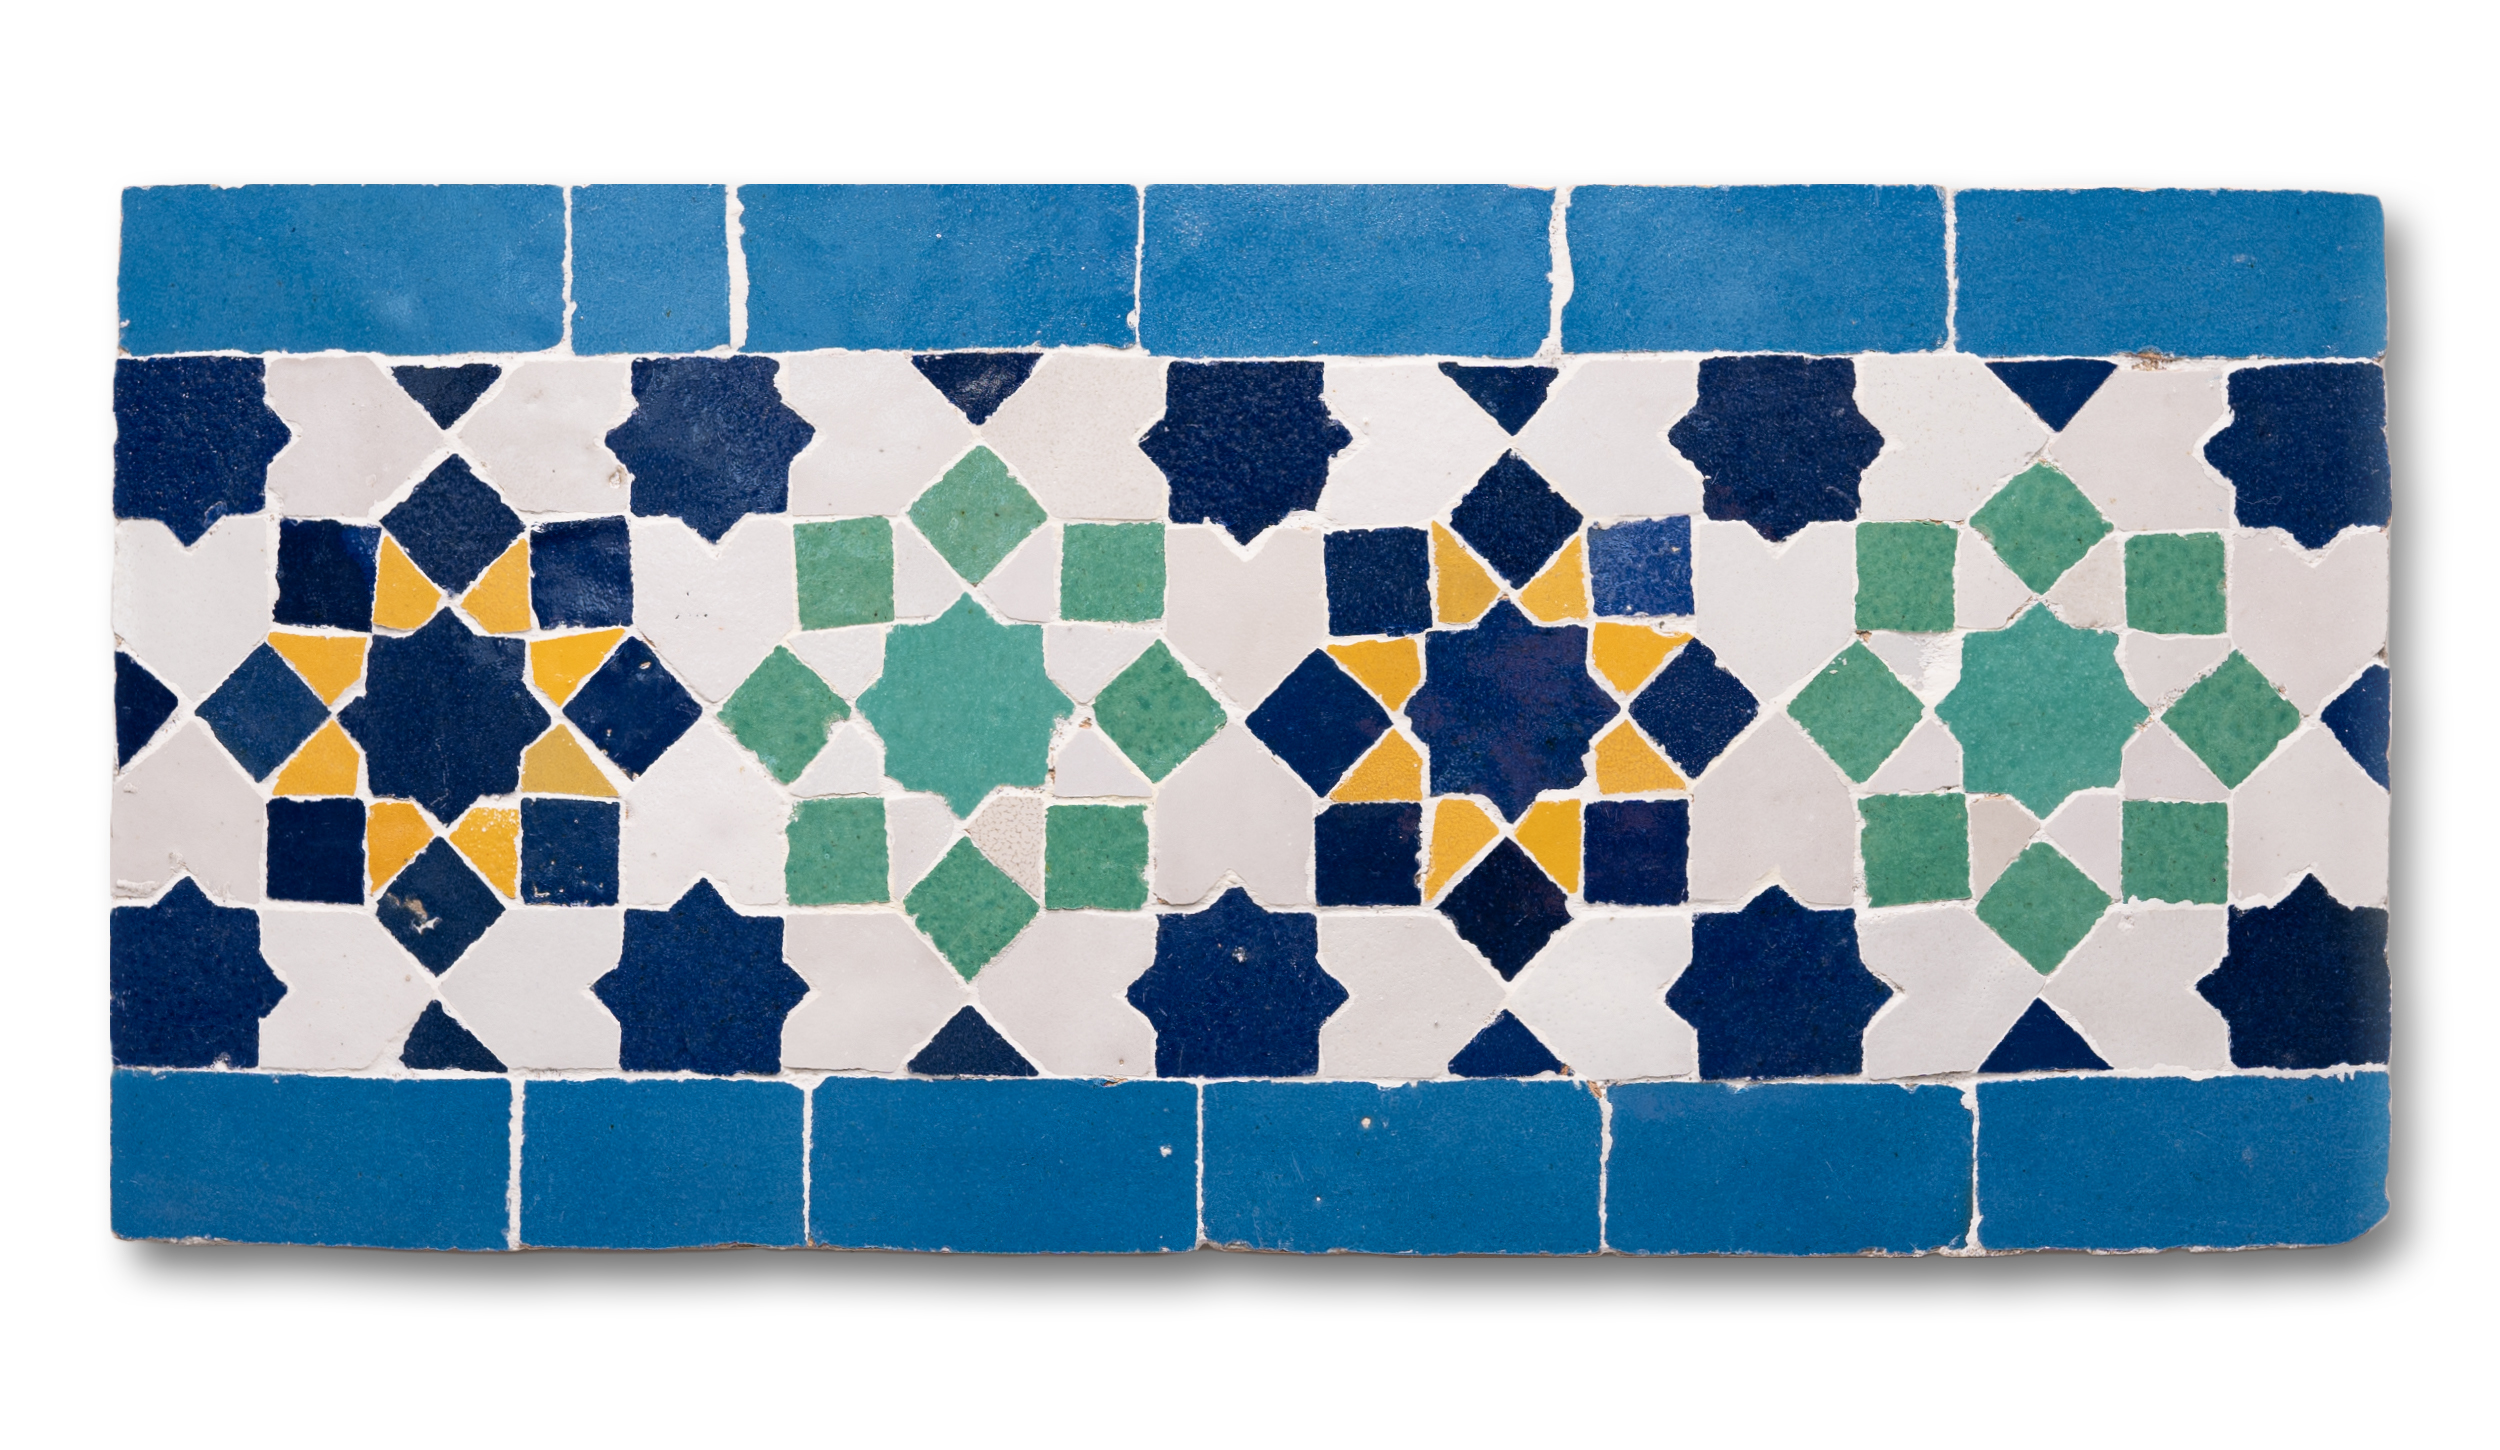 Moroccan Mosaic & Tile House CTP79-01 Mazagan Handmade Cement Tile and White 8x8 Light Blue Gold